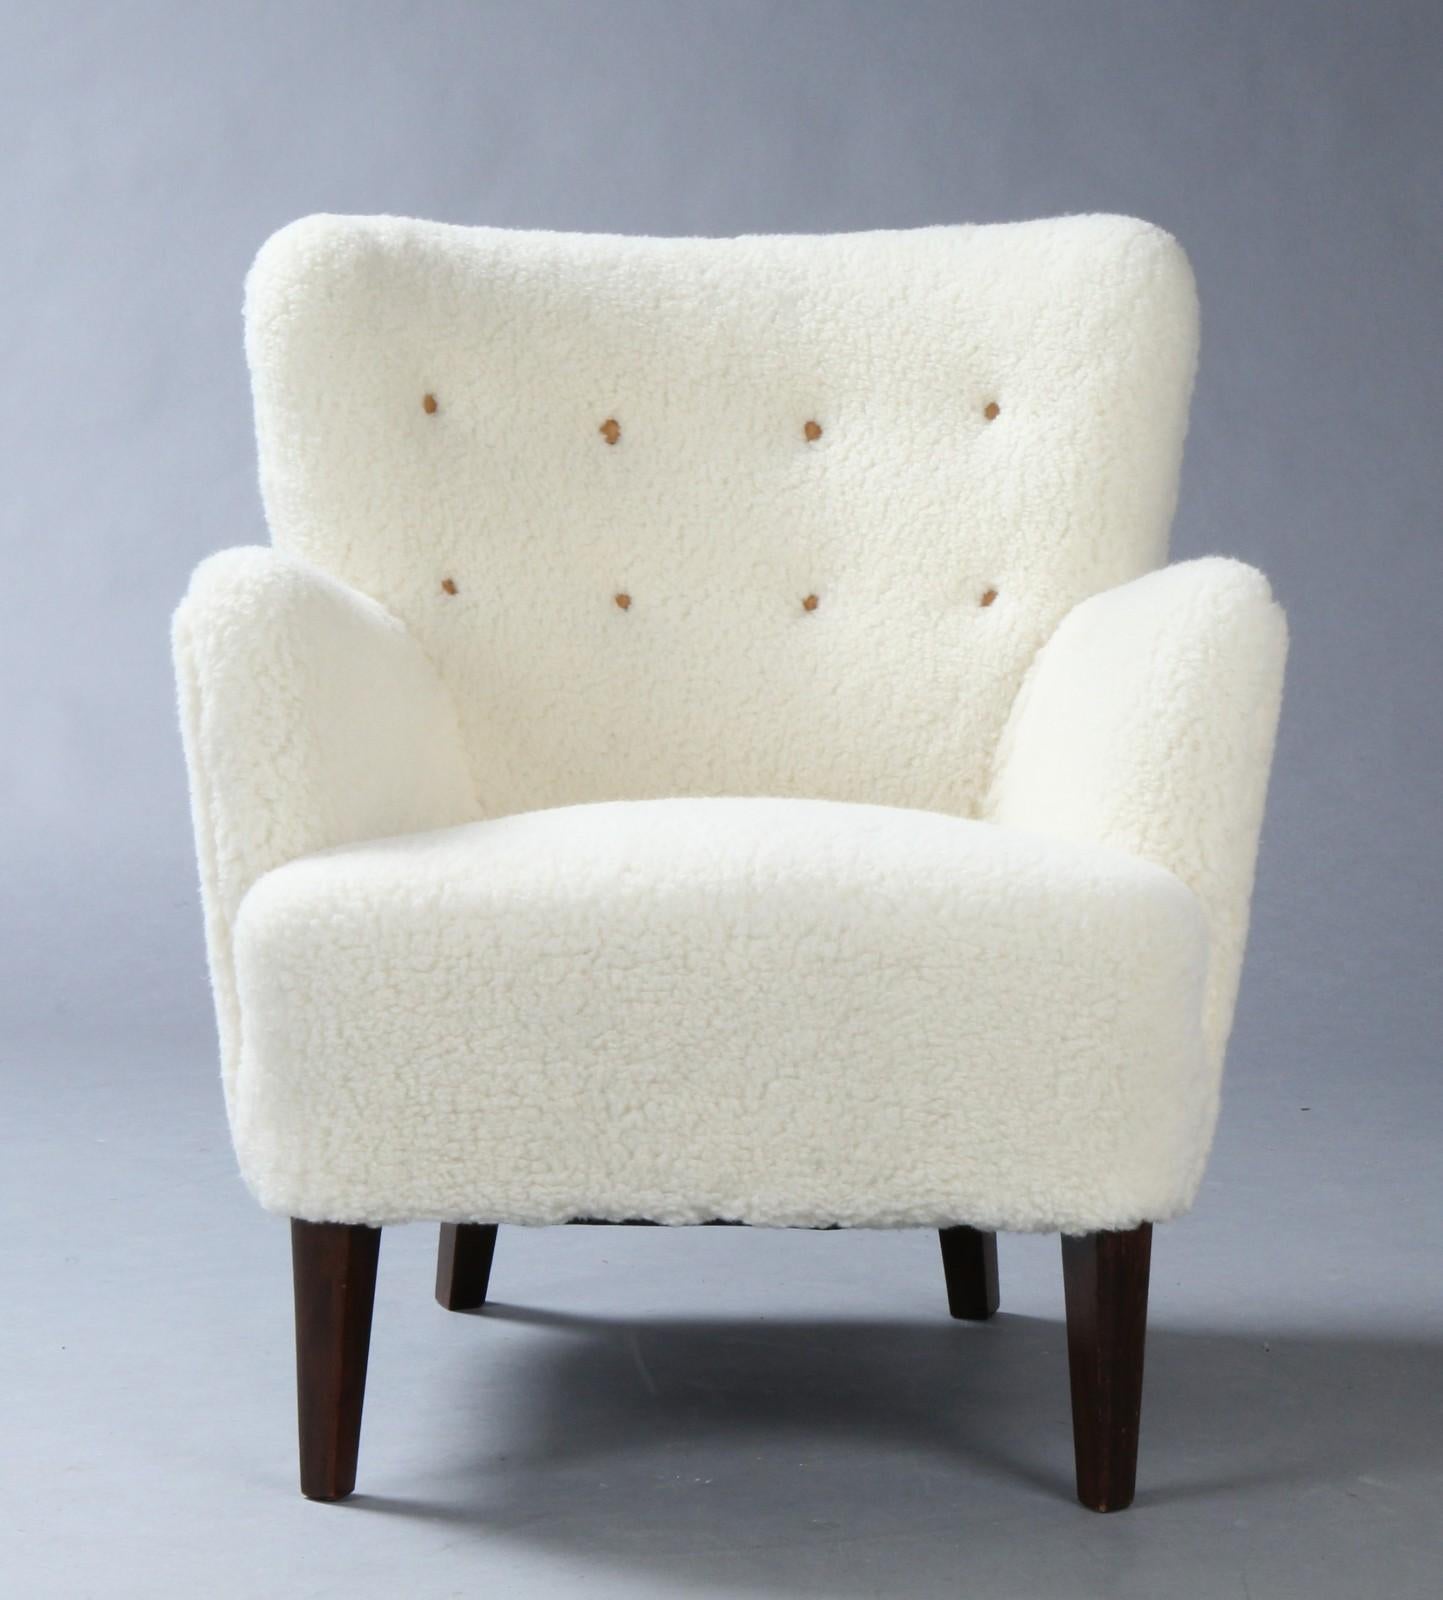 Lounge chair newly upholstered with white sheepskin. Model 1748 designed in the 1950s by Danish super duo Peter Hvidt and Orla Mölgaard Nielsen for Fritz Hansen.